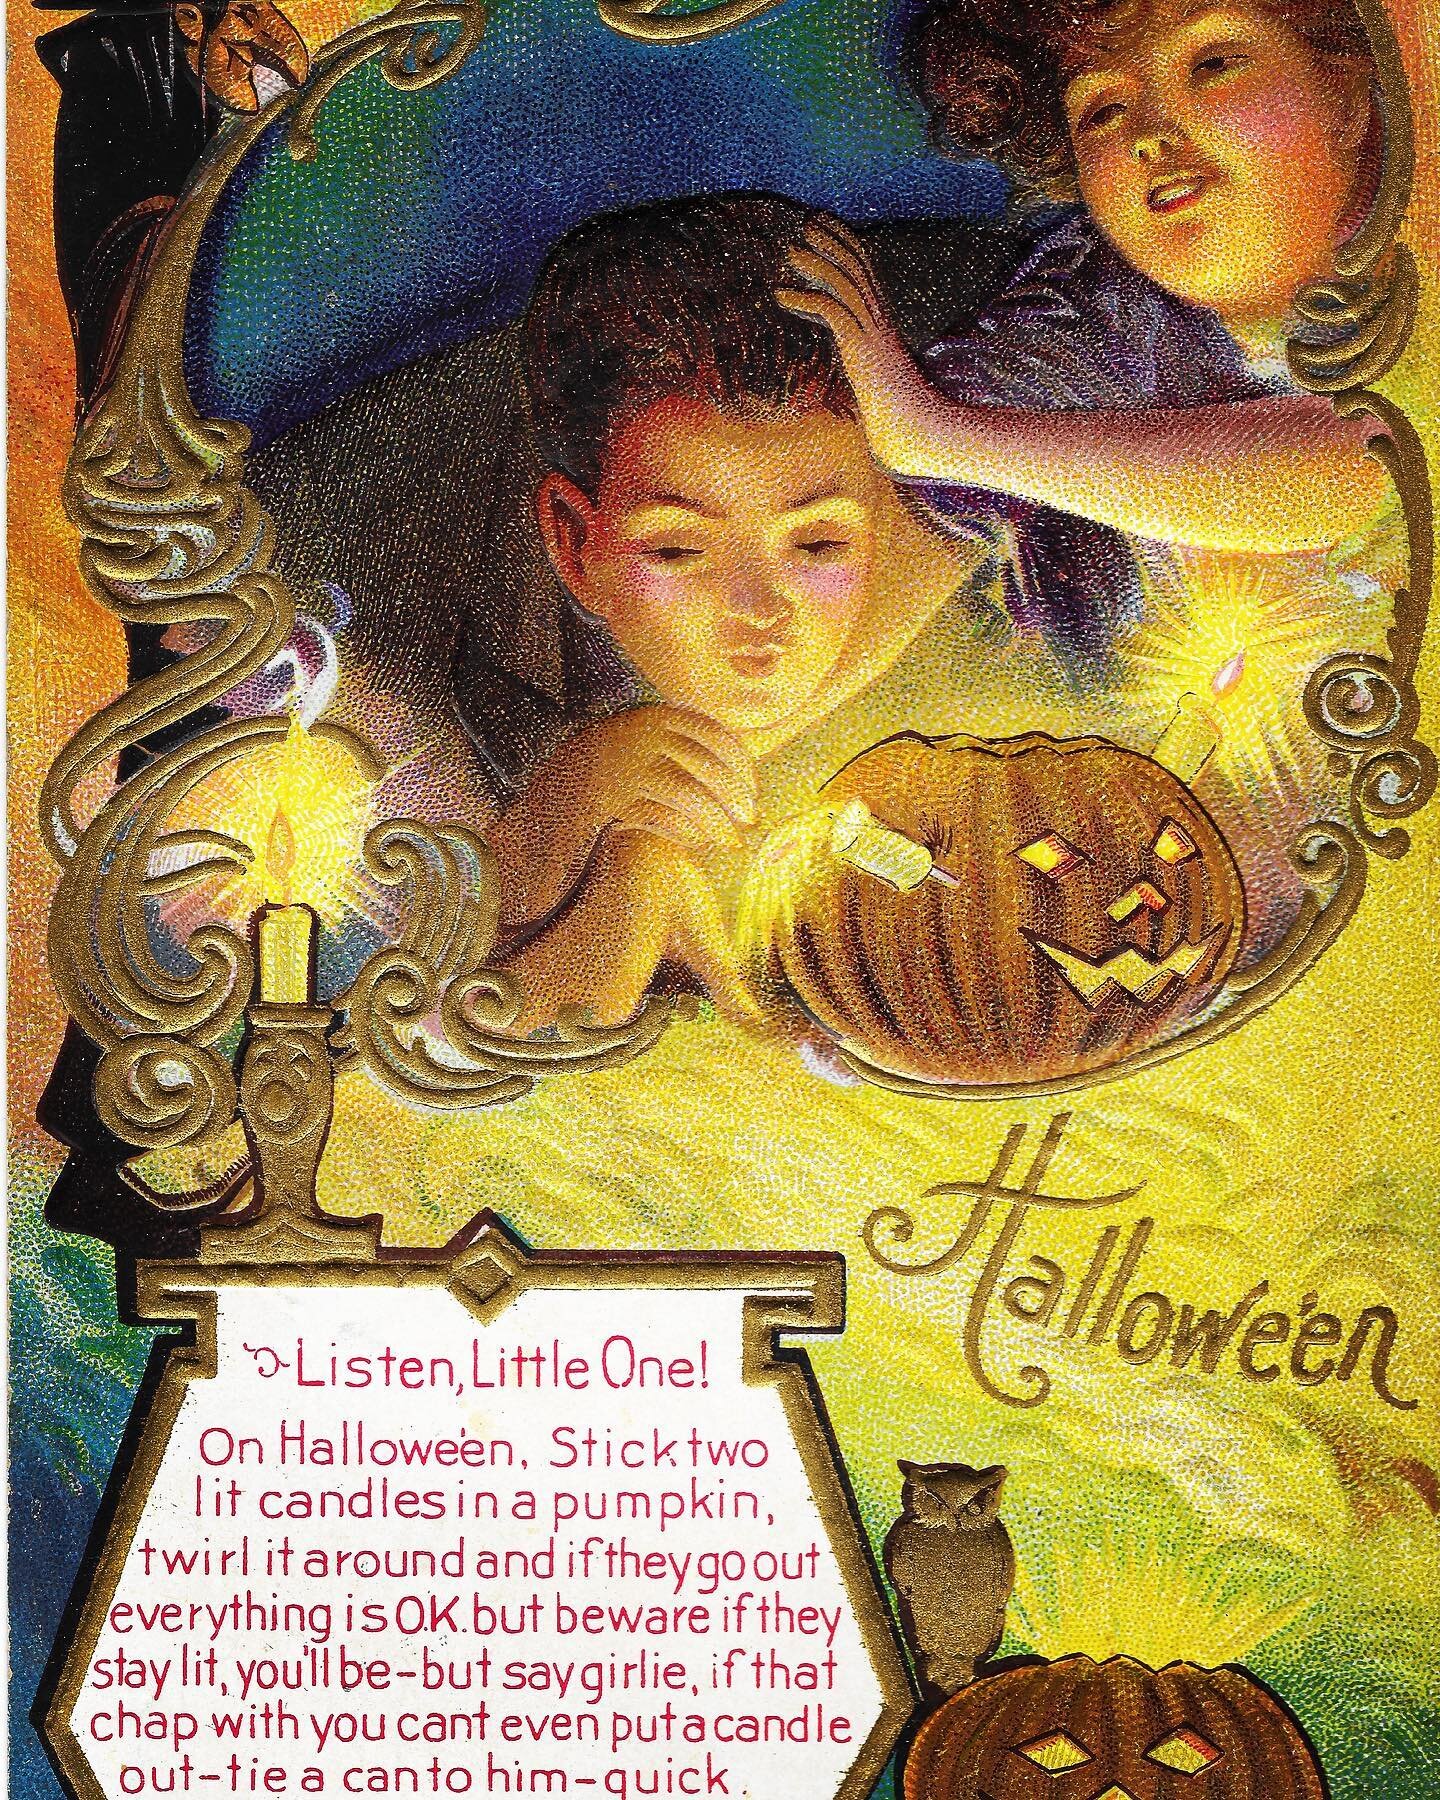 From our Curator&rsquo;s collection, this beautifully embossed and colored postcard, c.1914. Going out or staying home, the Coney Island Museum hopes you have some scary good fun on Halloween! #halloween #vintagepostcard #coneyislandusa #coneyislandf